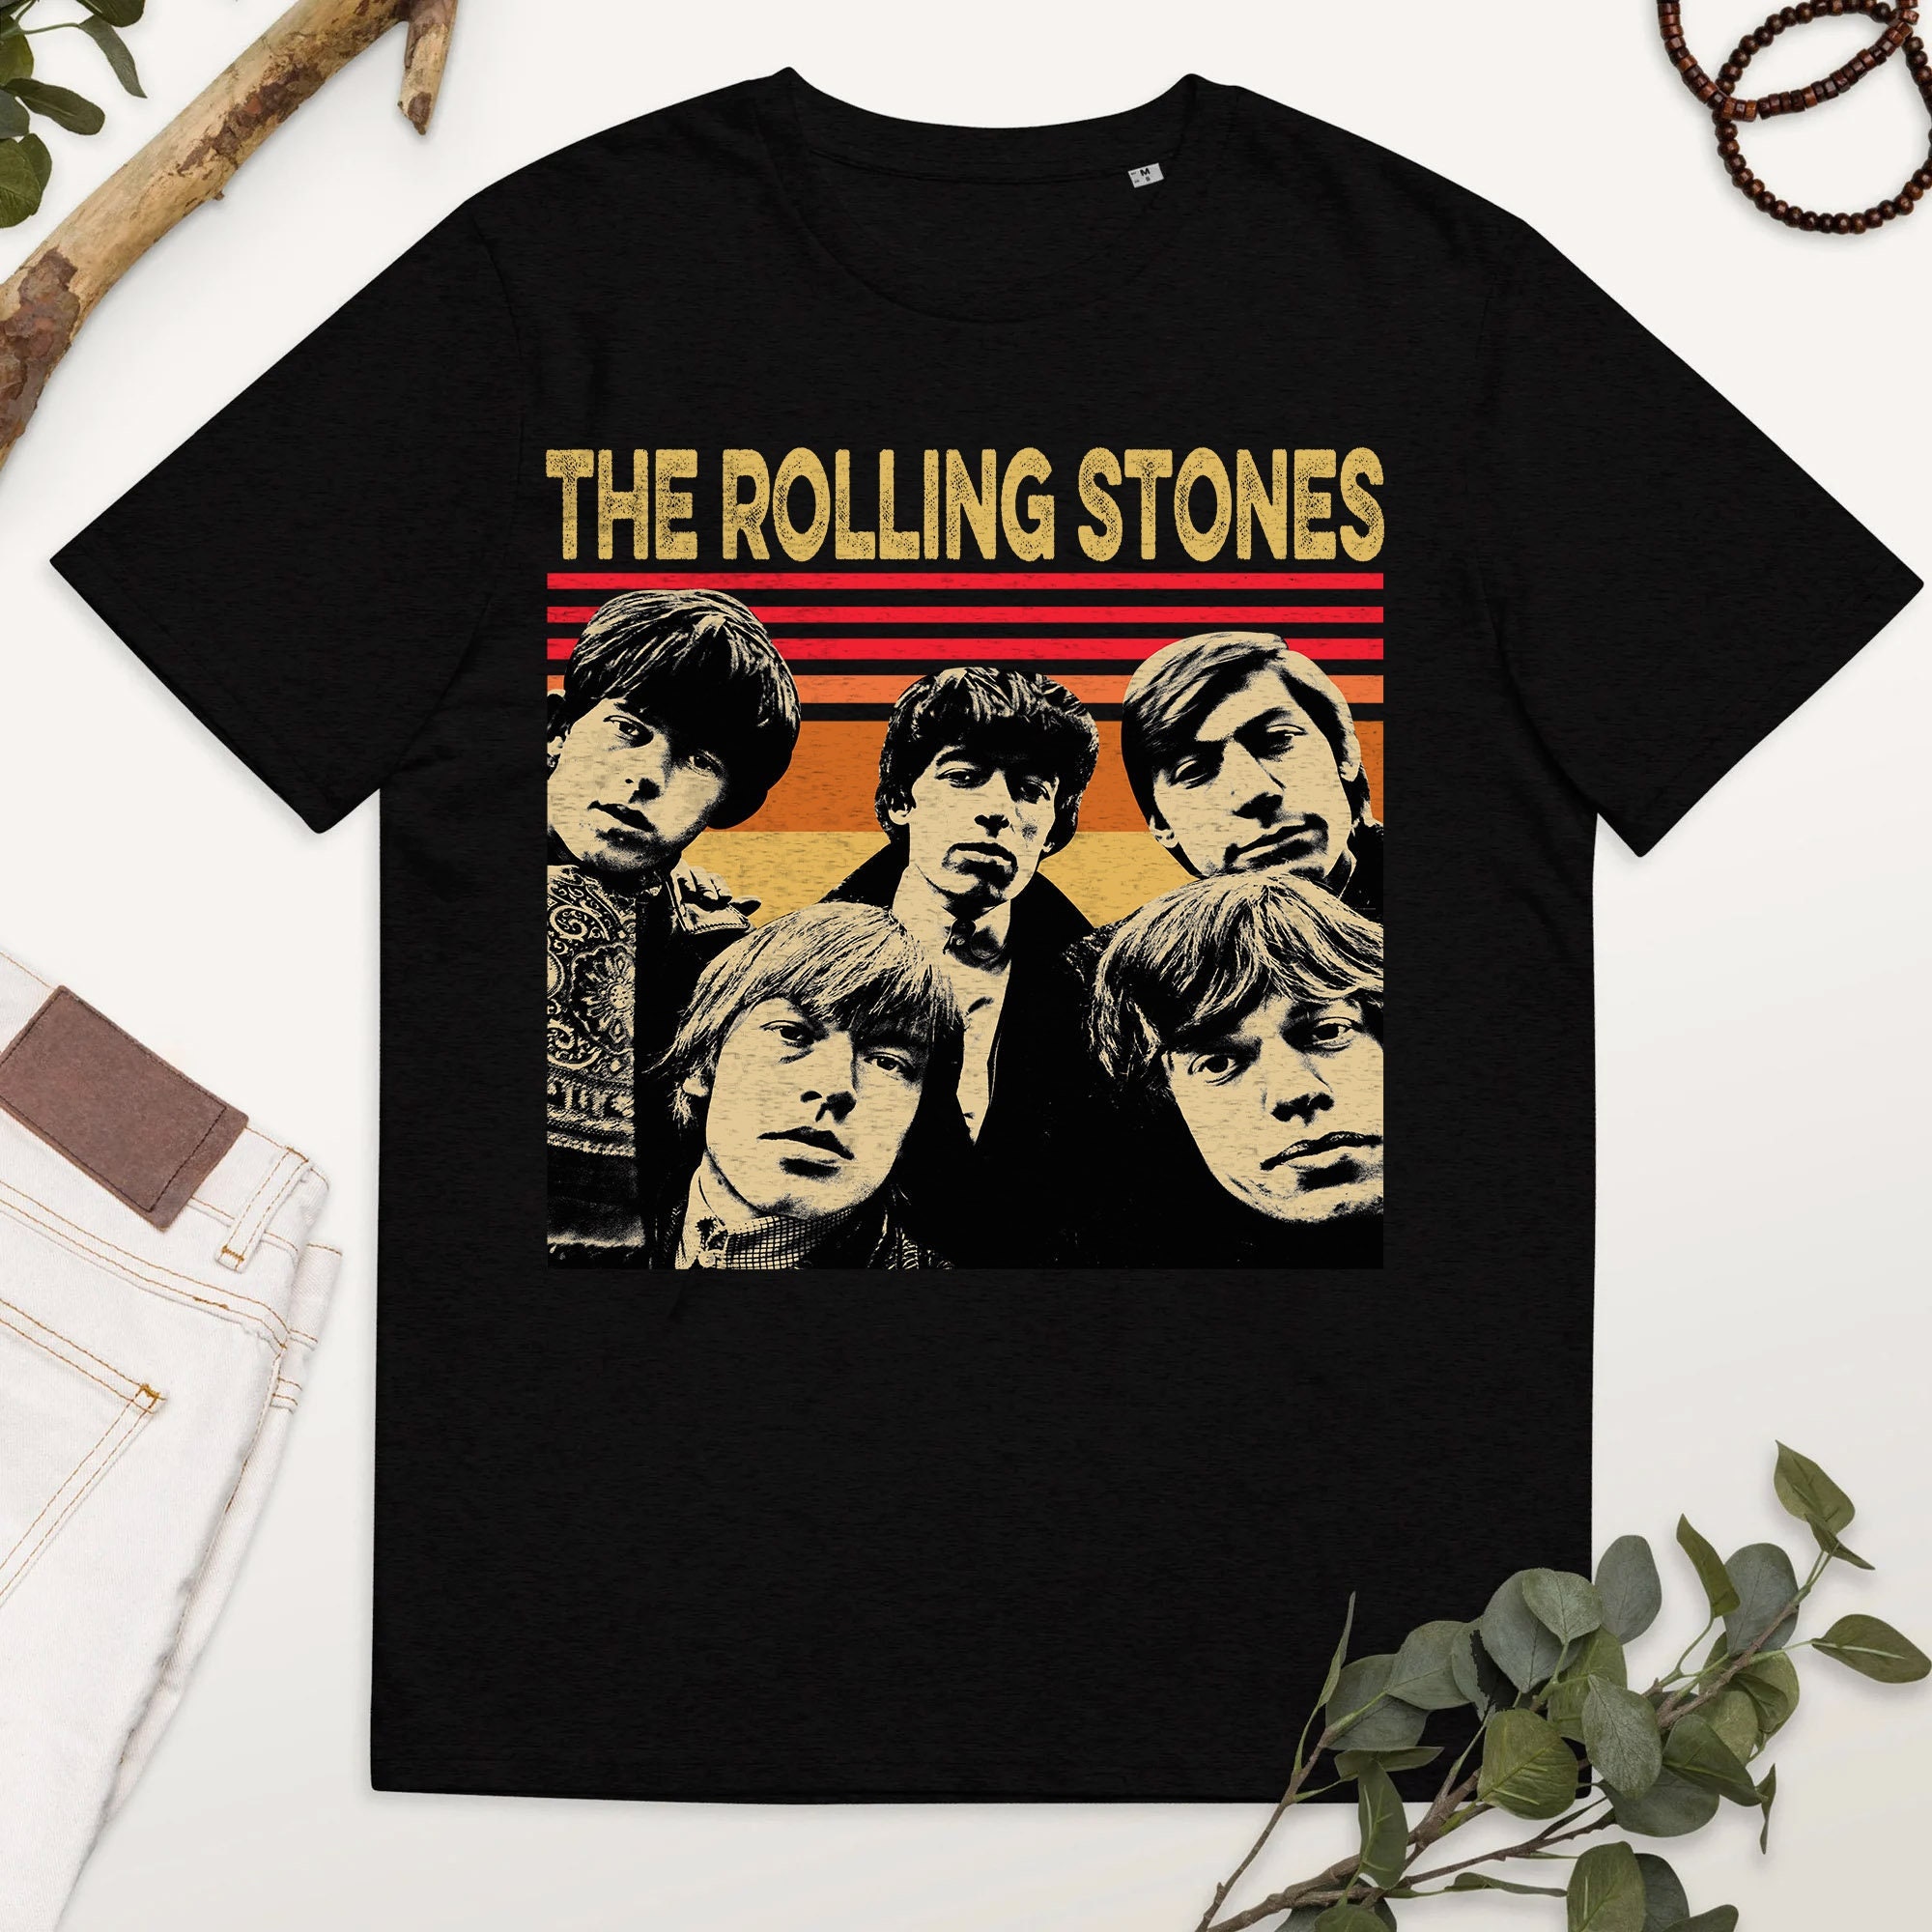 Discover The Rolling Stones Vintage Keith Richards T-Shirt